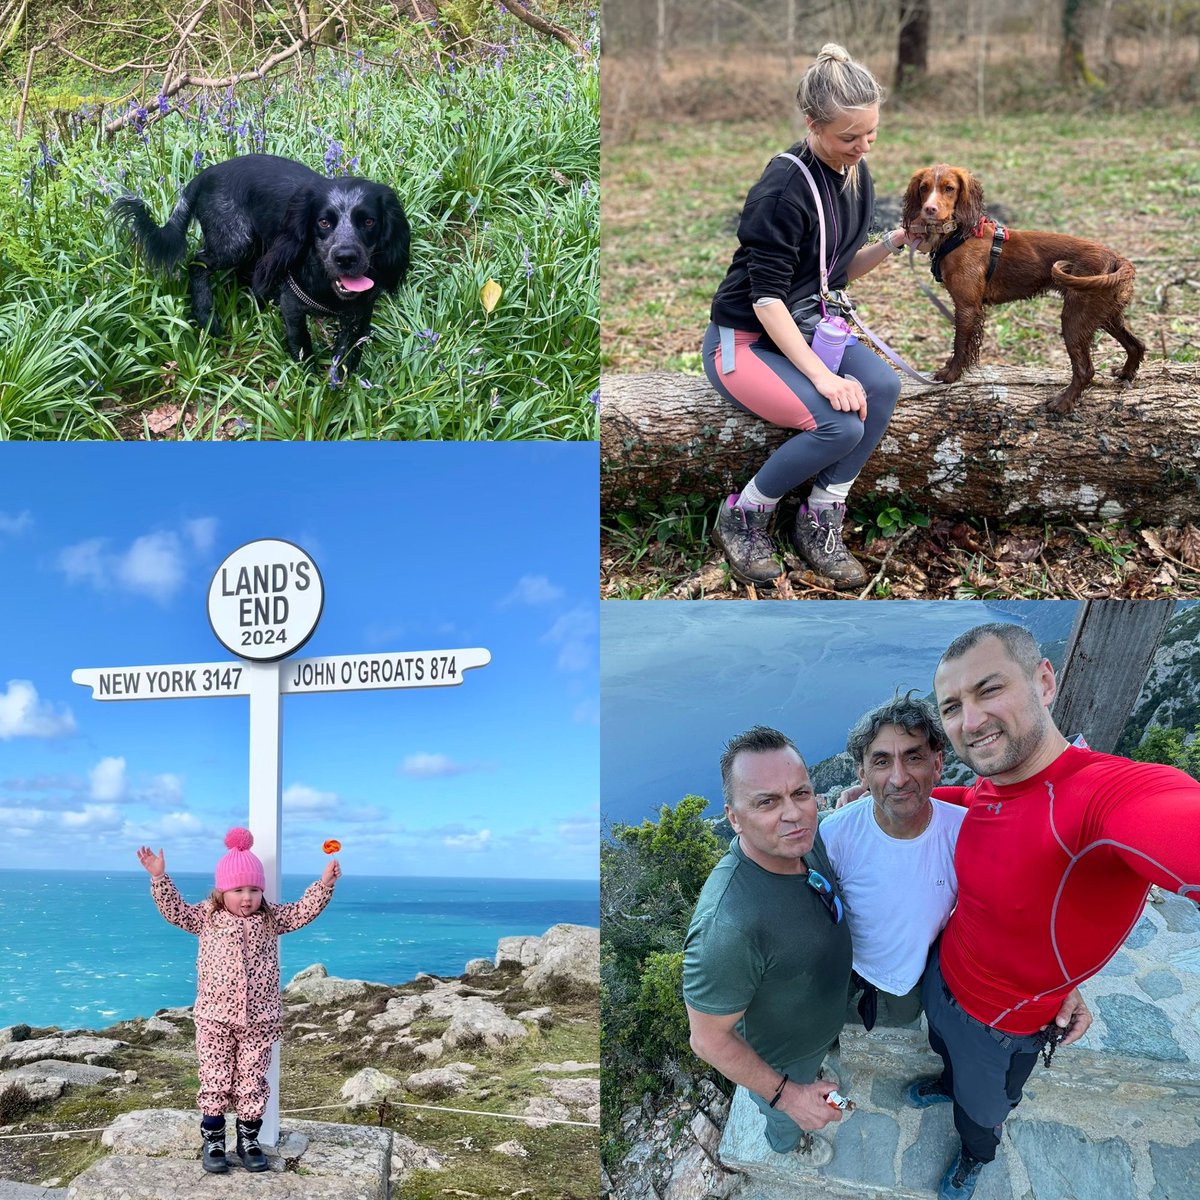 An amazing 1st week in our #MilesforSmiles challenge! 🎉 We’ve already raised over £2,000 & covered 2000 miles for @MakeAWishUK! From our CEO, Stephen Pattrick taking on mountainous treks to our staff venturing on walks, runs & cycles. Here’s some photos of their amazing efforts!